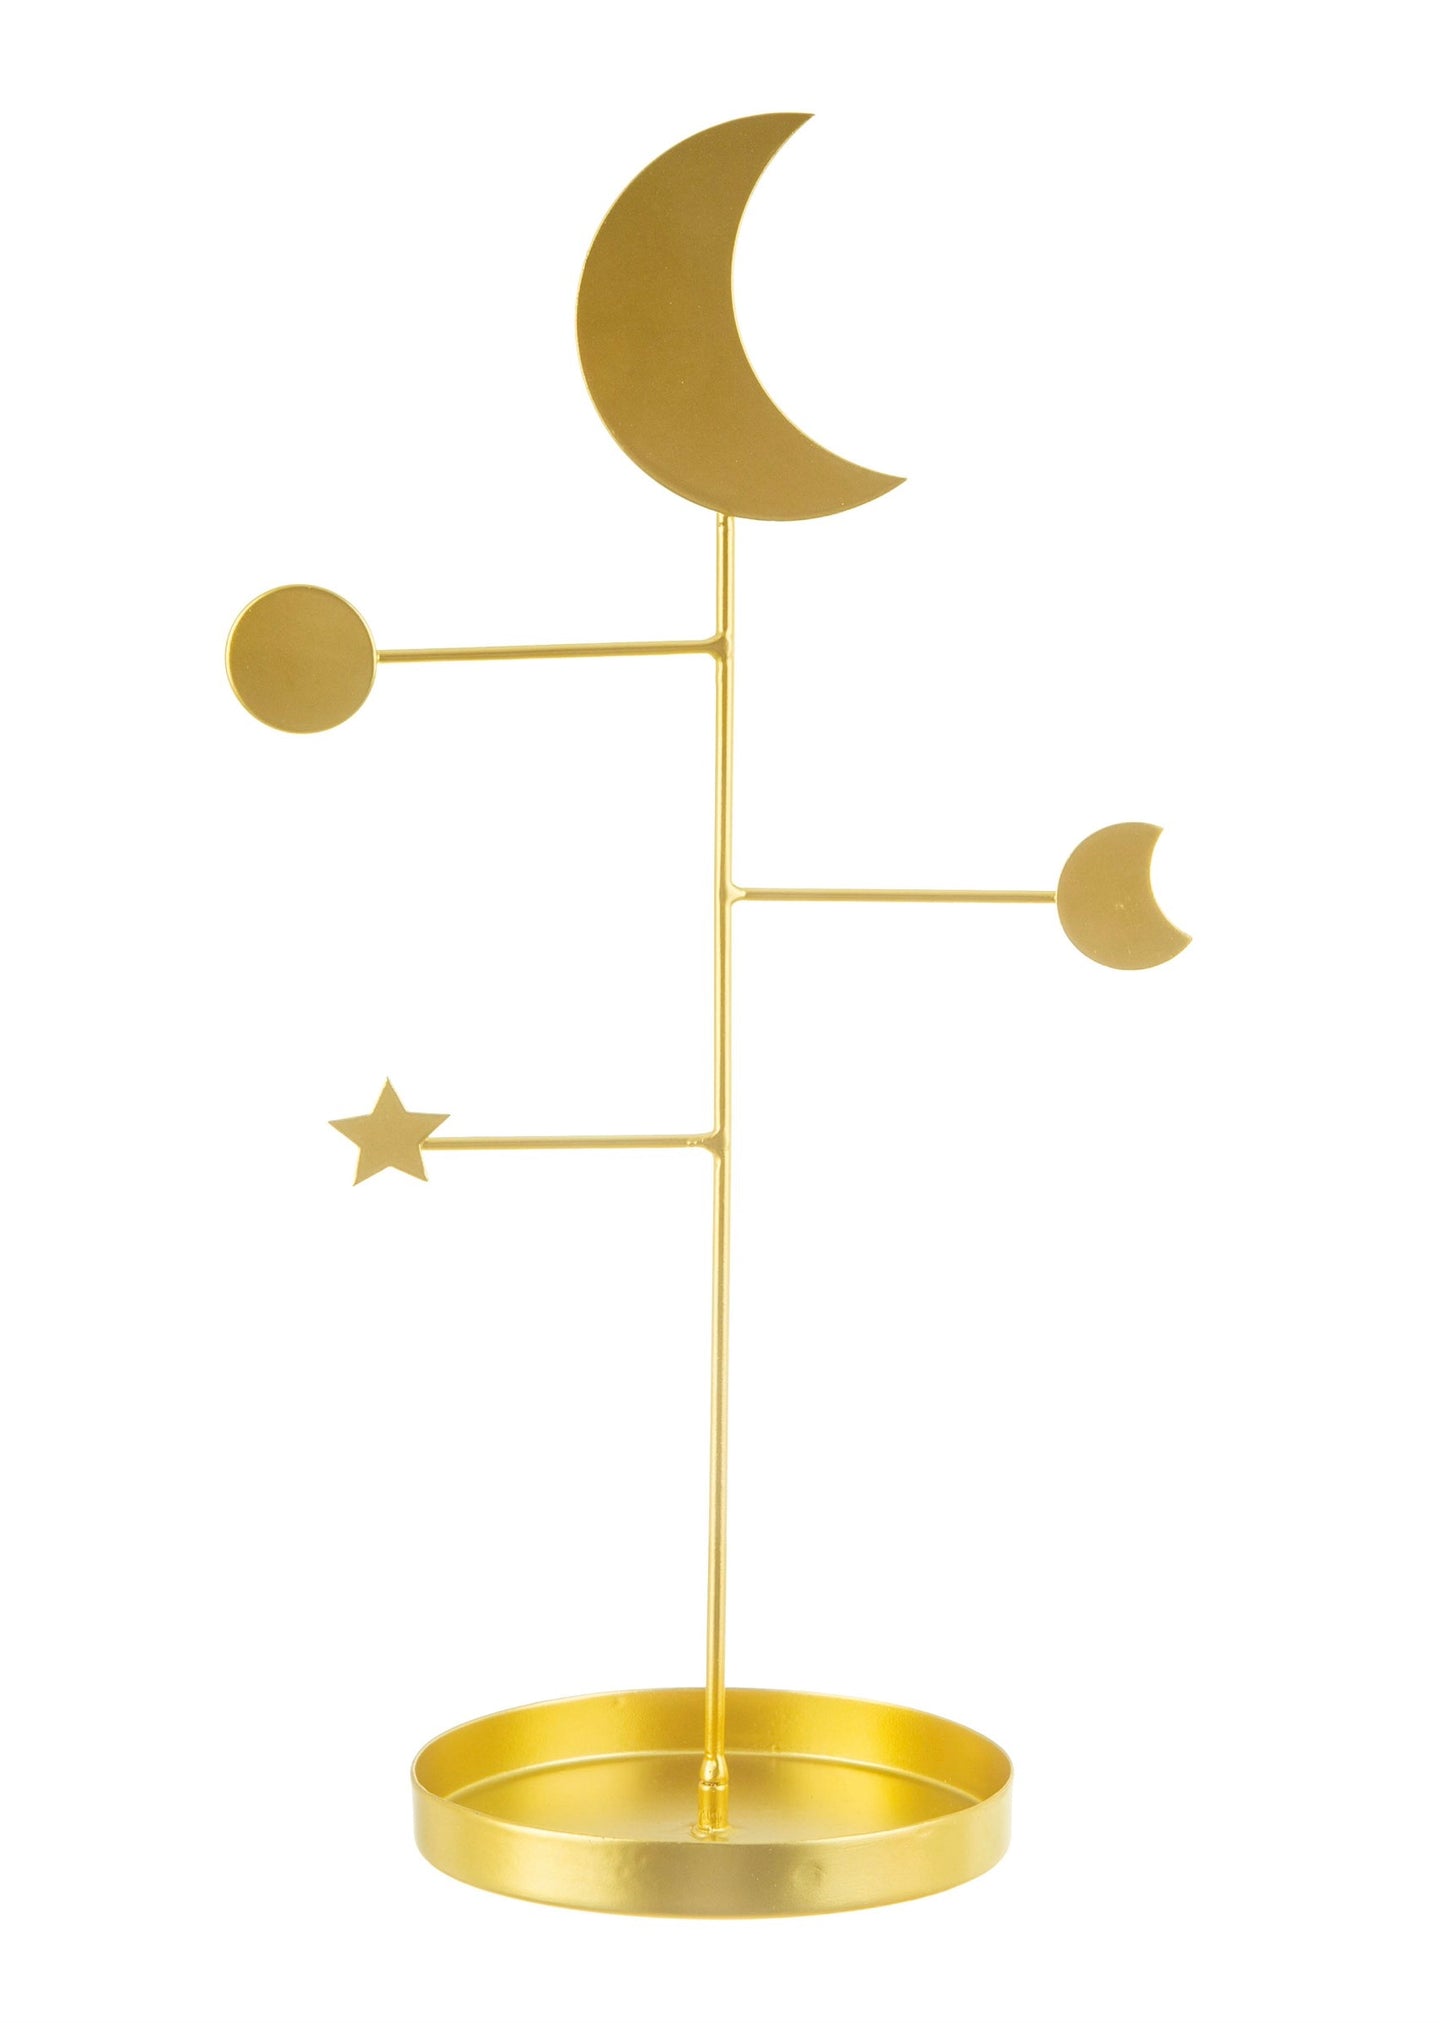 Gold jewlery stand with three arms with moon decorations